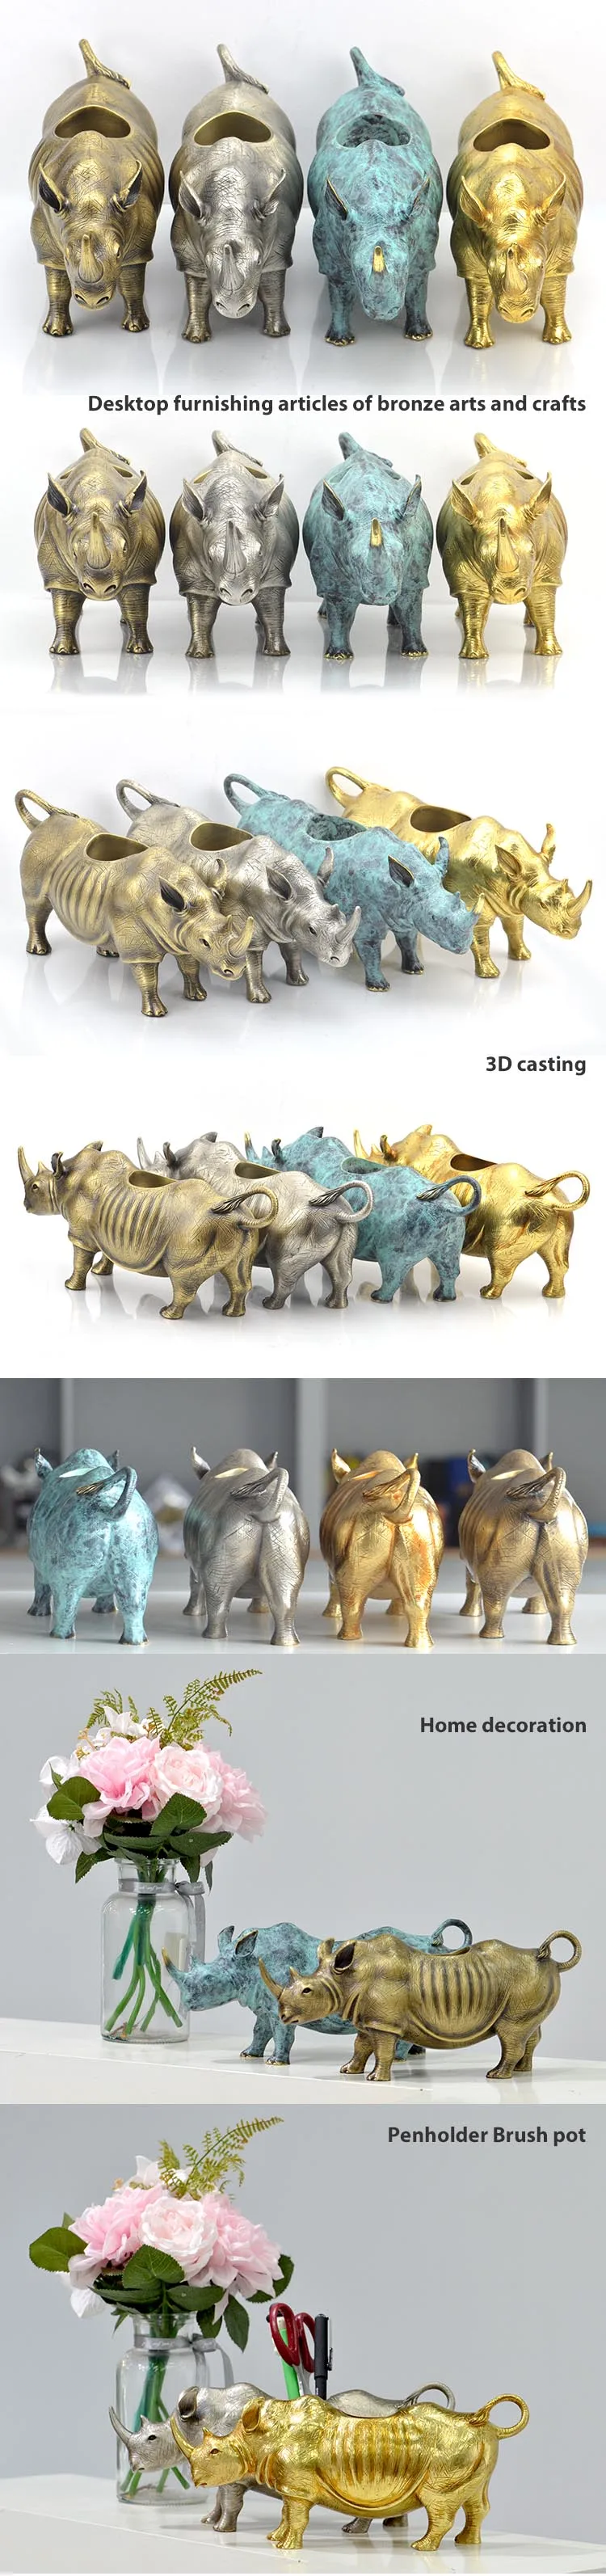 Wholesale Arts And Crafts Gift Decorative Item Supplies Custom Carving Home Decoration Metal Animal Arts Craft